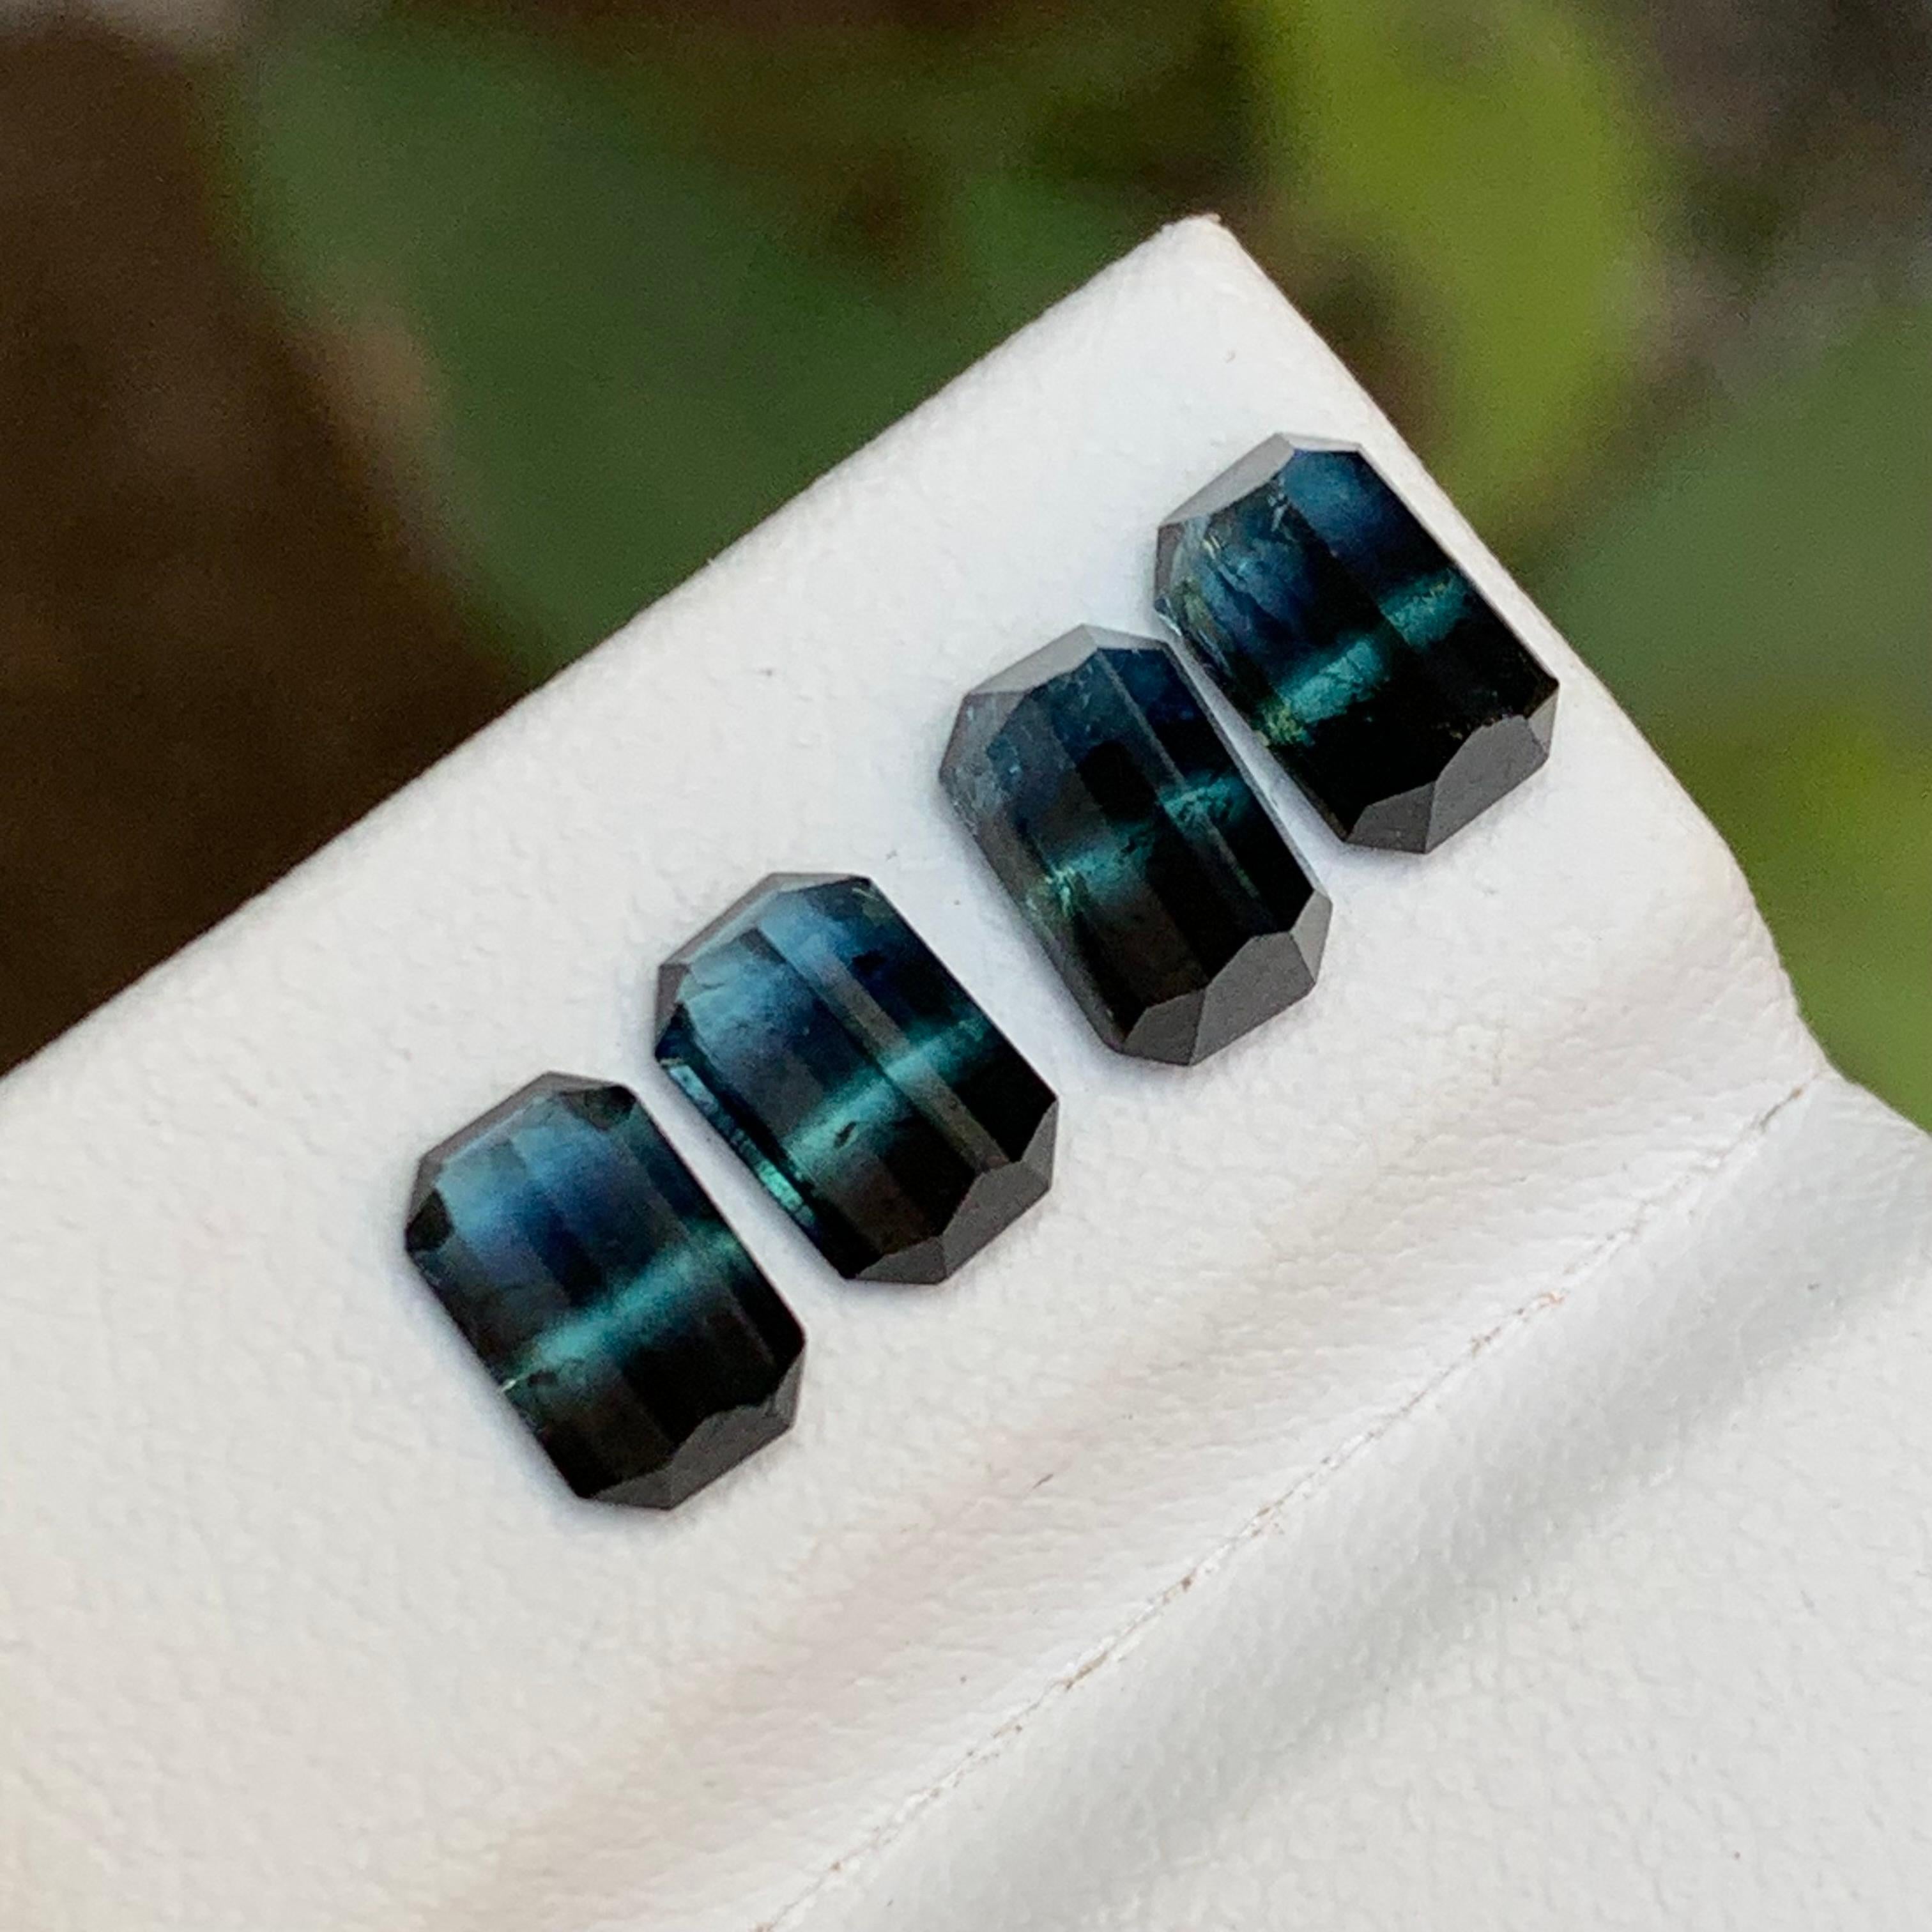 Rare Black-Blue Bicolor Tourmaline Gemstone Pairs, 3.55 Ct Emerald Cut-Earrings In New Condition For Sale In Peshawar, PK